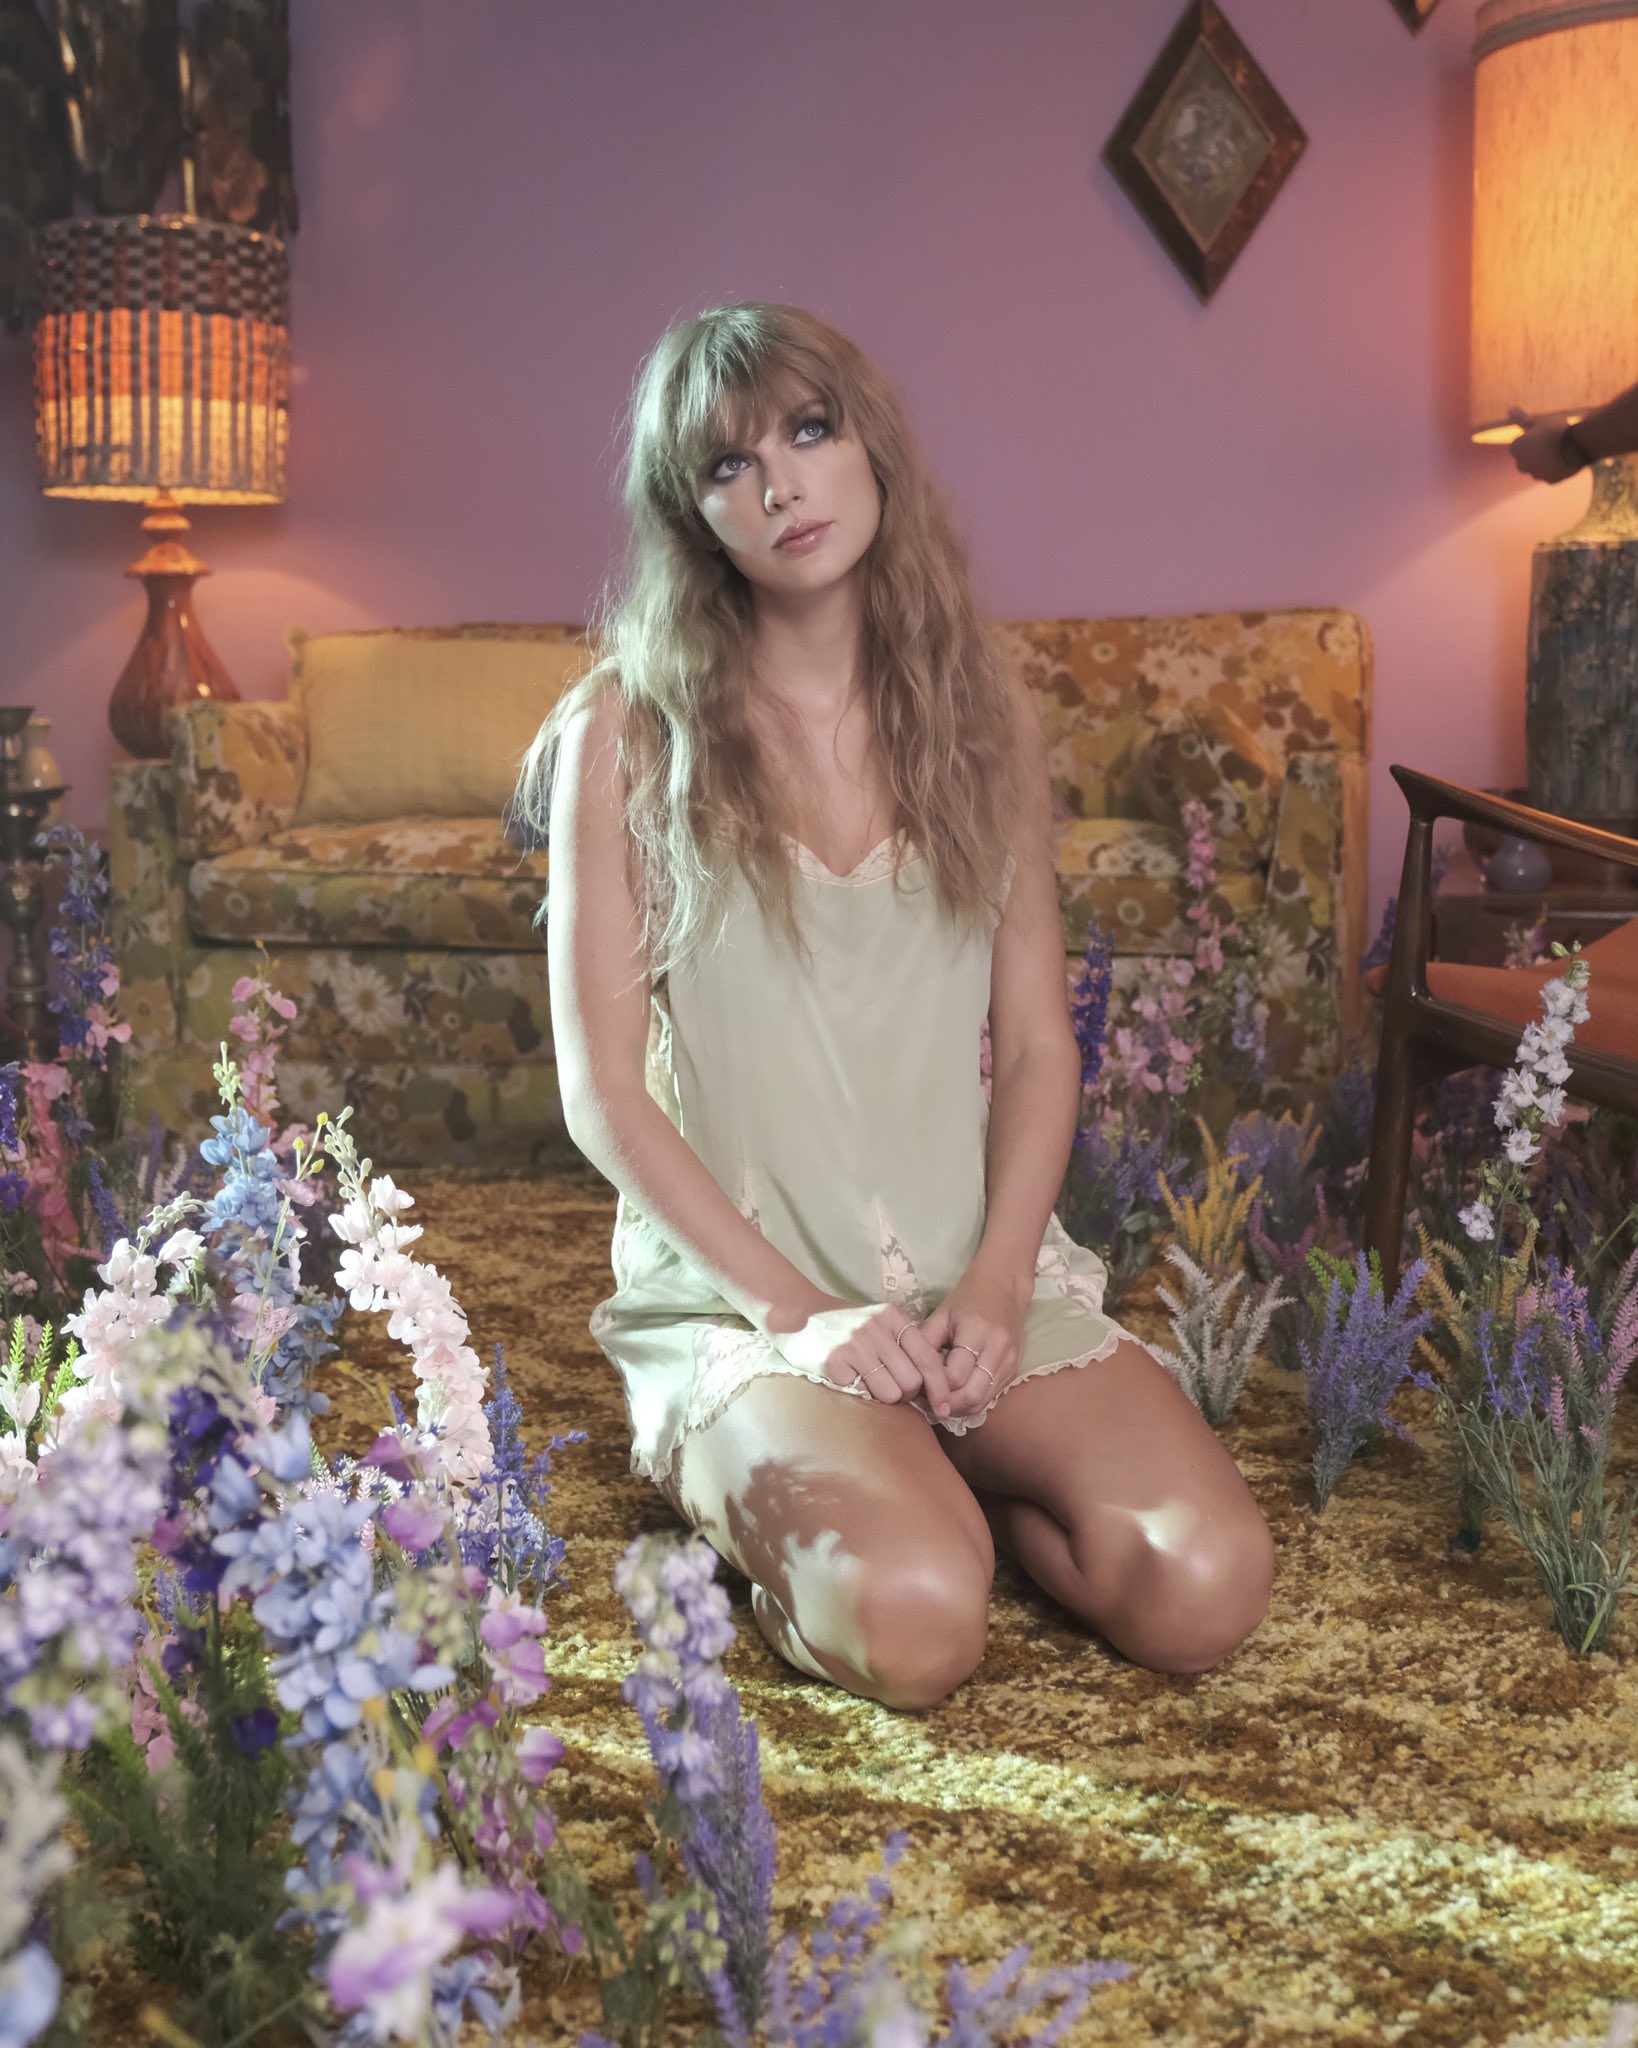 Taylor Swift on X: The Lavender Haze video is out now. There is lots of  lavender. There is lots of haze. There is my incredible costar  @laith_ashley who I absolutely adored working